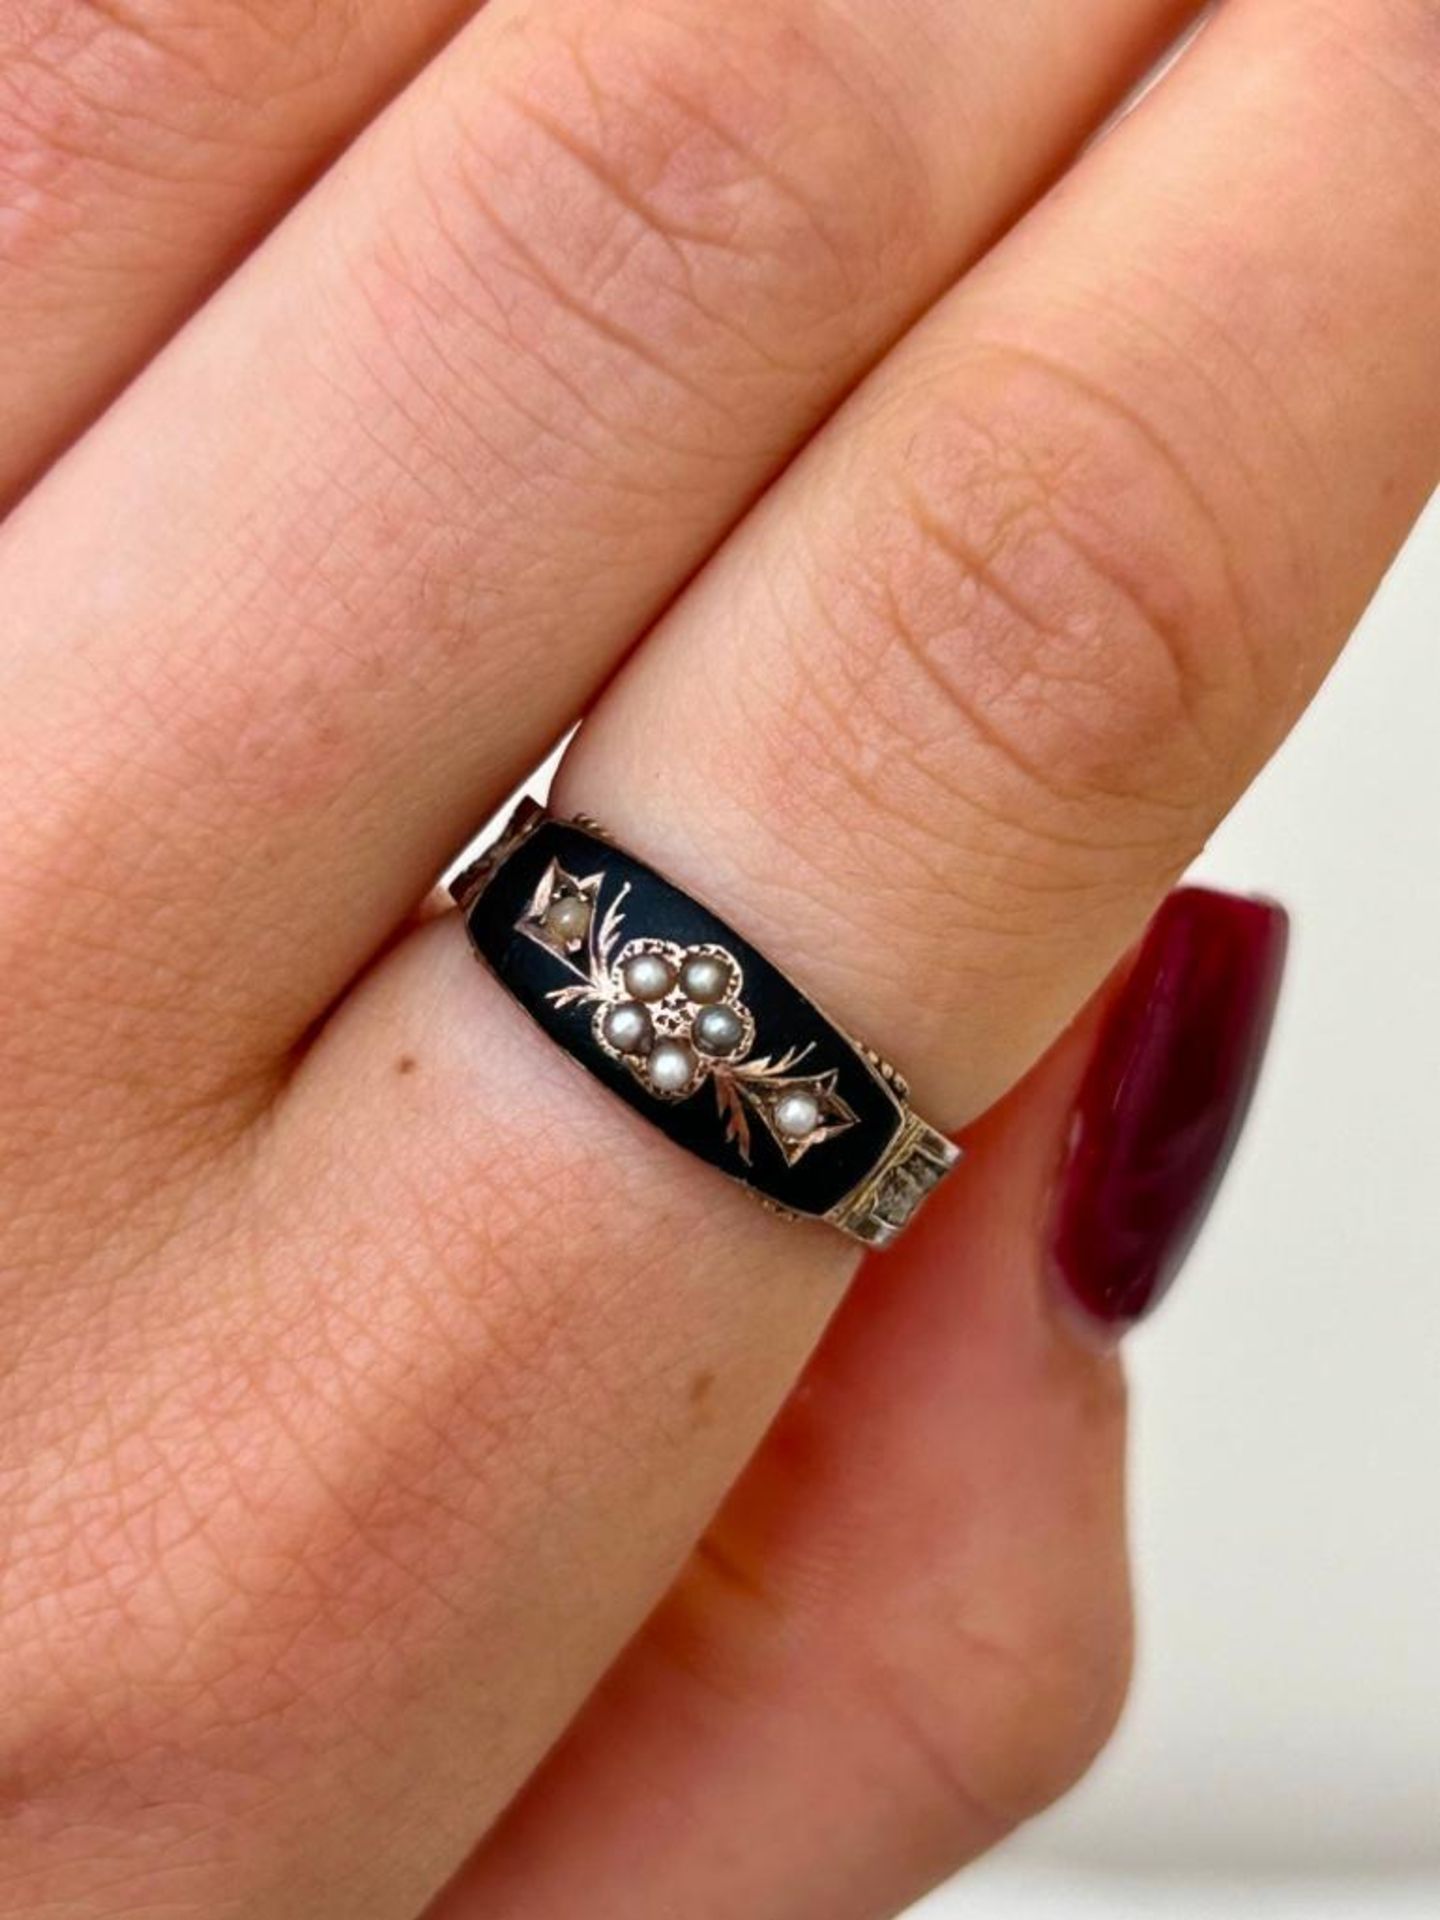 Antique 9ct Gold Black Enamel and Pearl Ring - Image 3 of 8